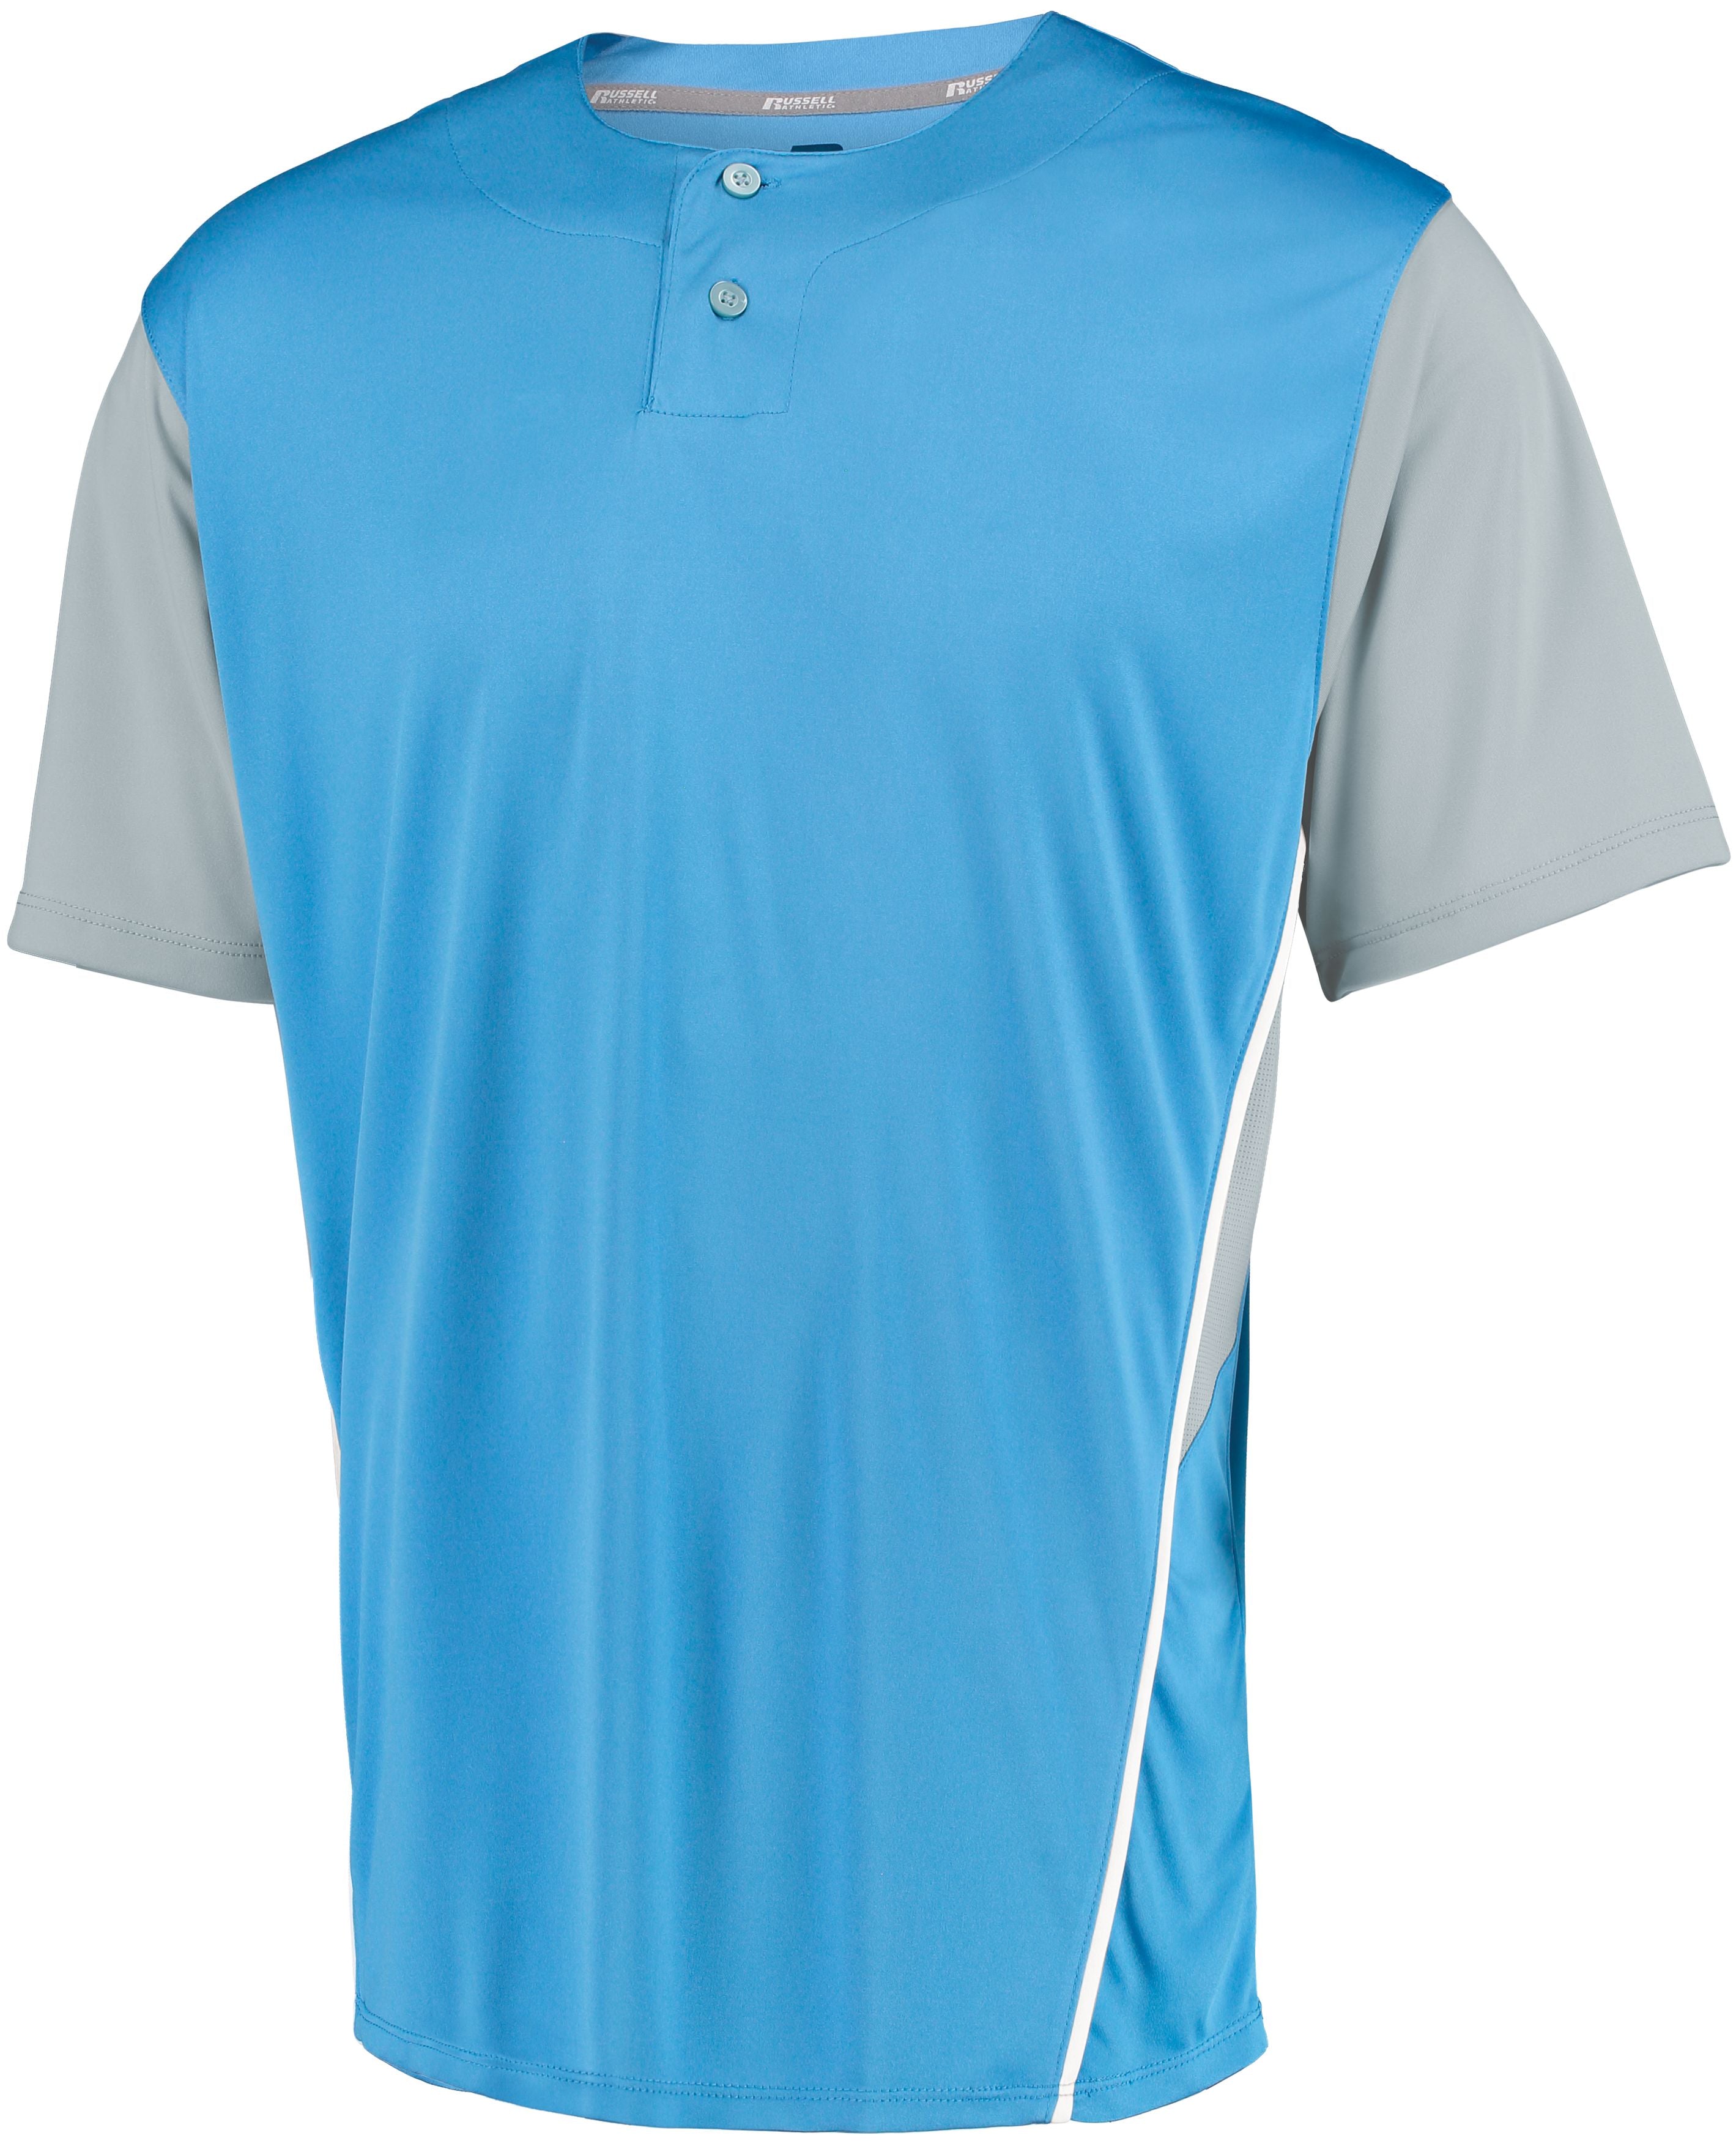 Russell Athletic Youth Two-Button Placket Jersey in Columbia Blue/Baseball Grey  -Part of the Youth, Youth-Jersey, Baseball, Russell-Athletic-Products, Shirts, All-Sports, All-Sports-1 product lines at KanaleyCreations.com